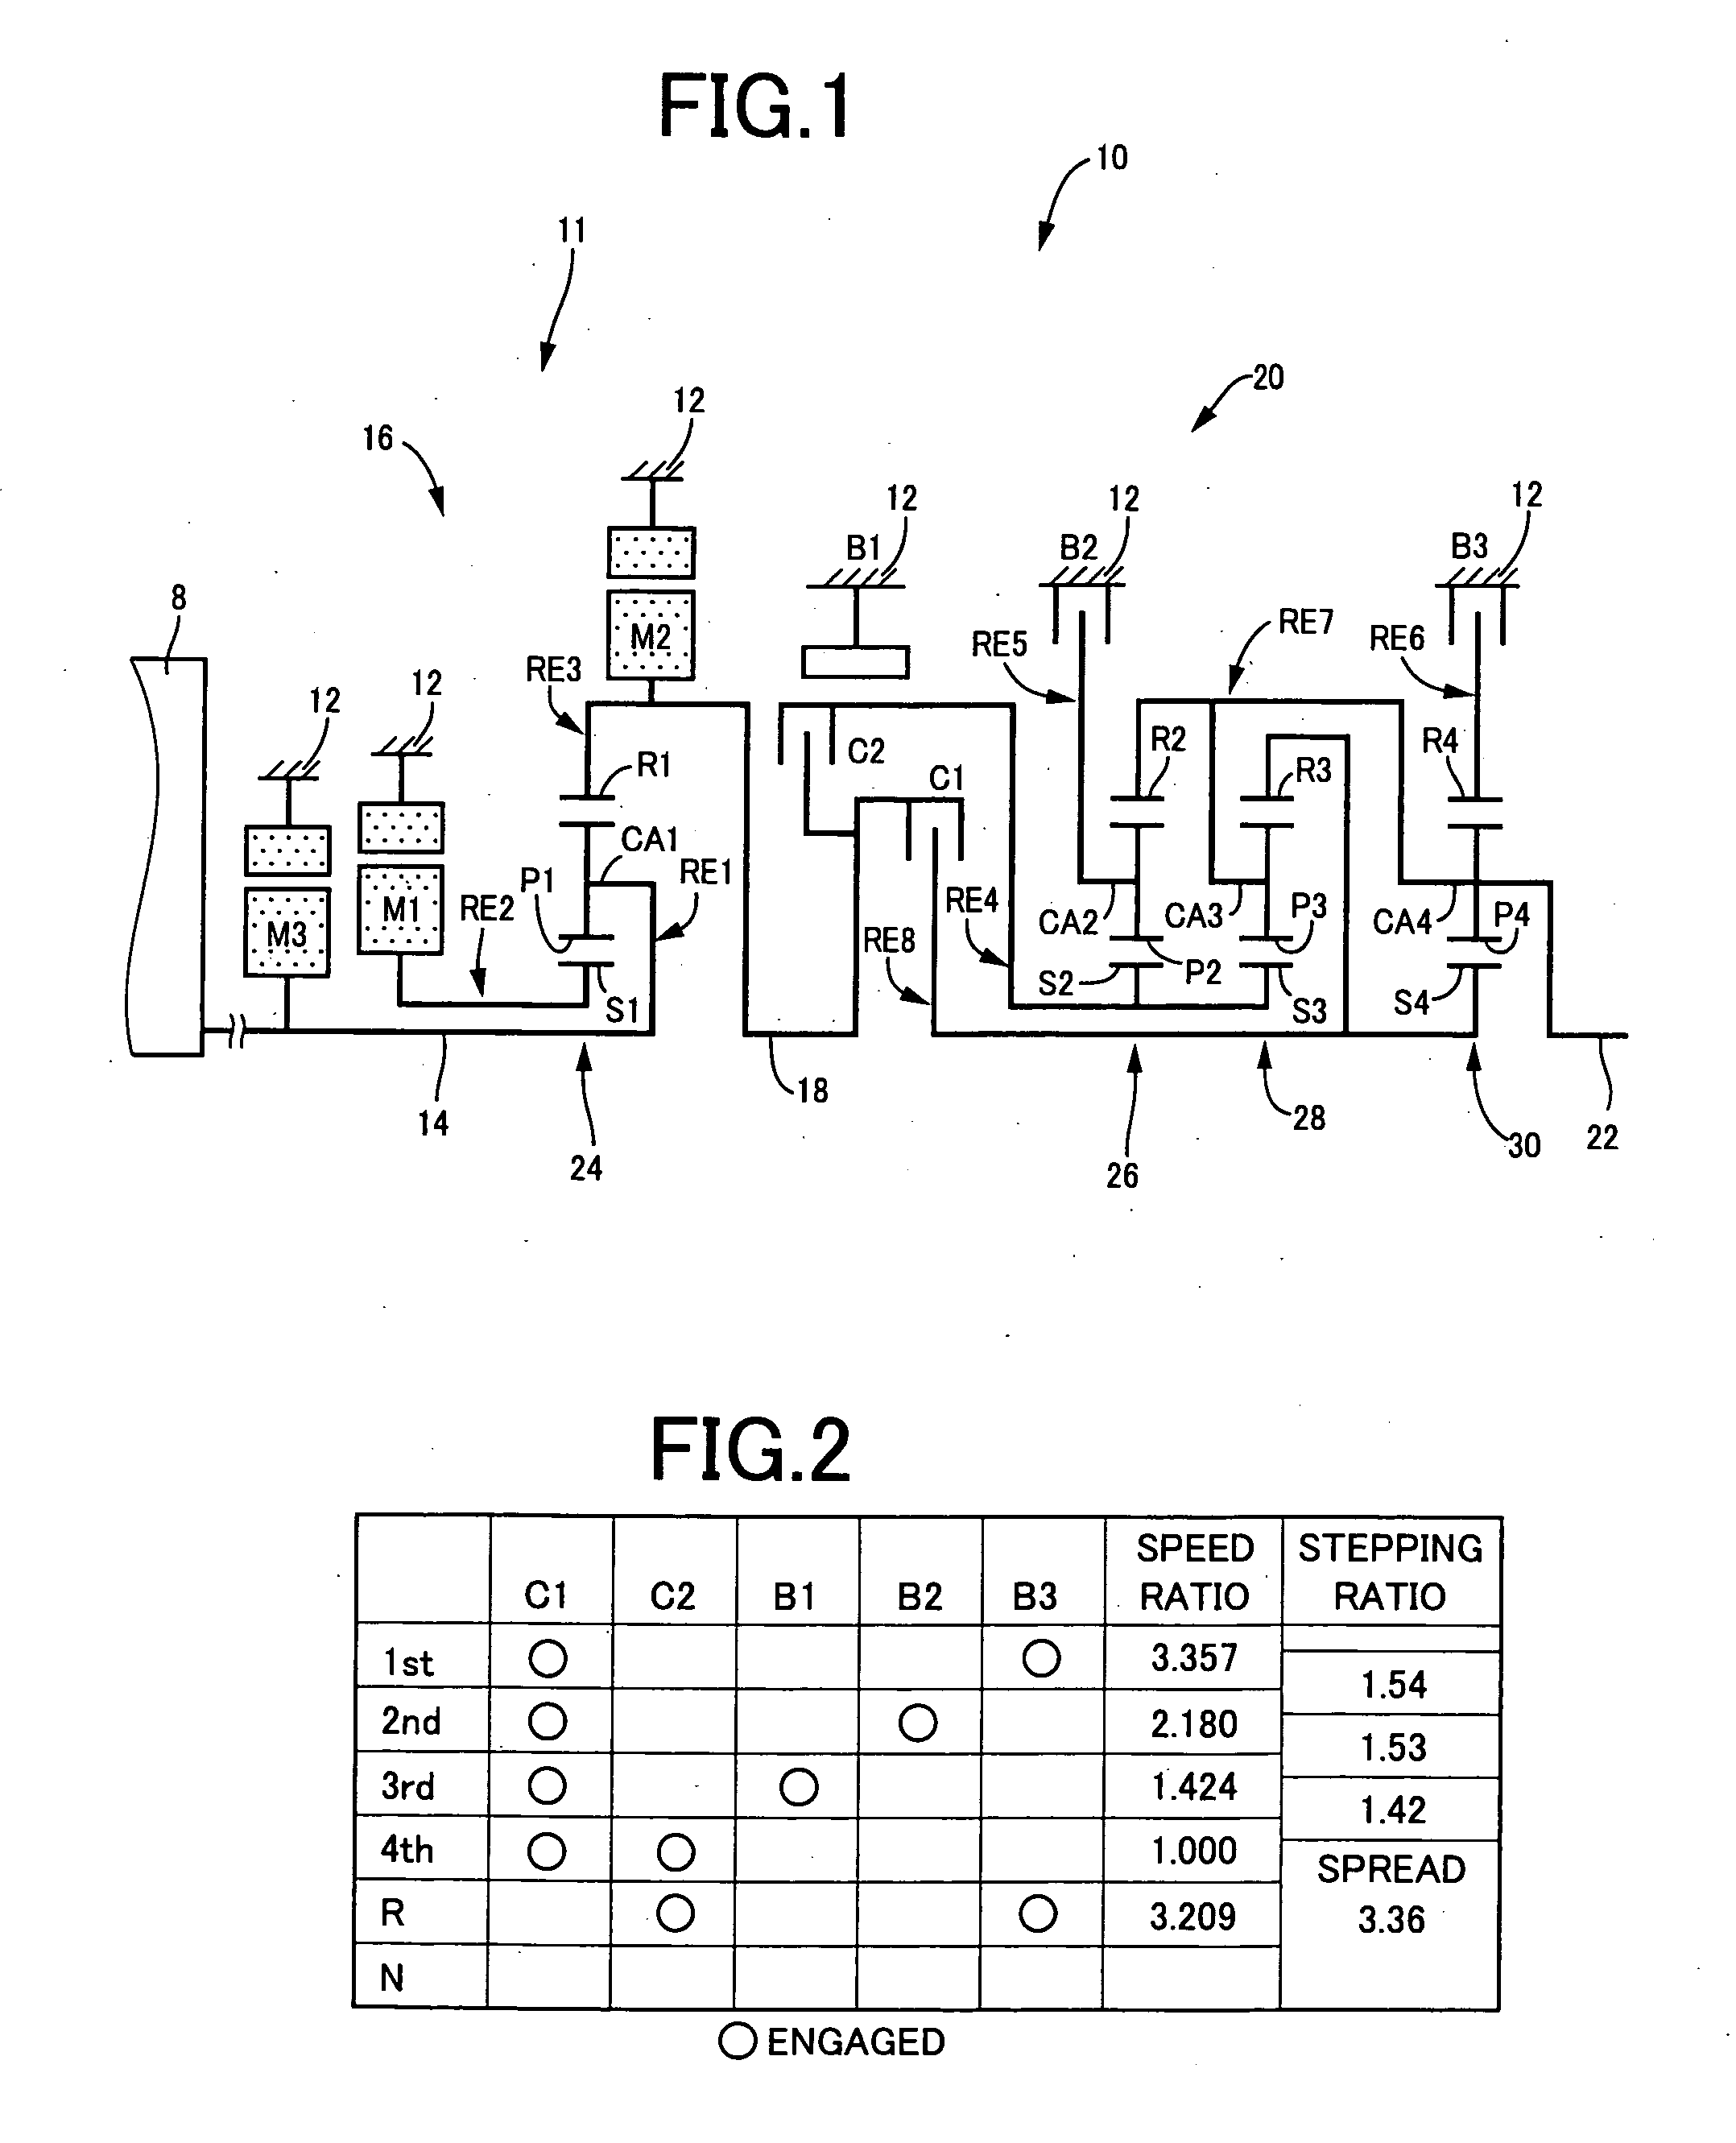 Control device for vehicular power transmitting apparatus